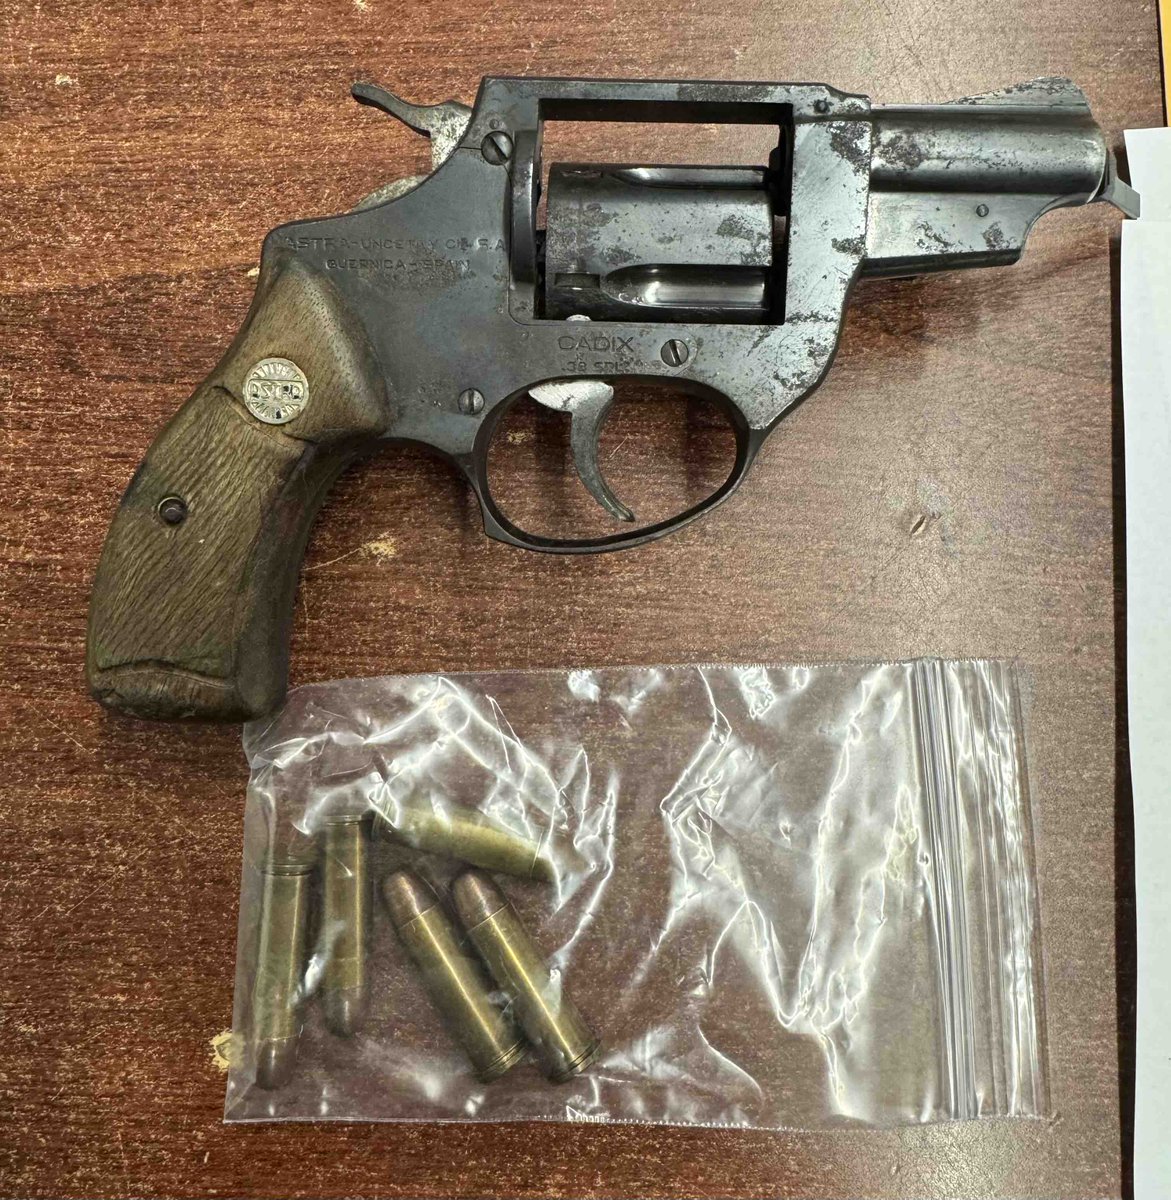 Collaboration is key! 🤝 Today, we teamed up with our community partners to take an illegally loaded firearm off the streets. Working together, we’re making our neighborhoods safer. #CommunityPartner #NCO #OneLessGun